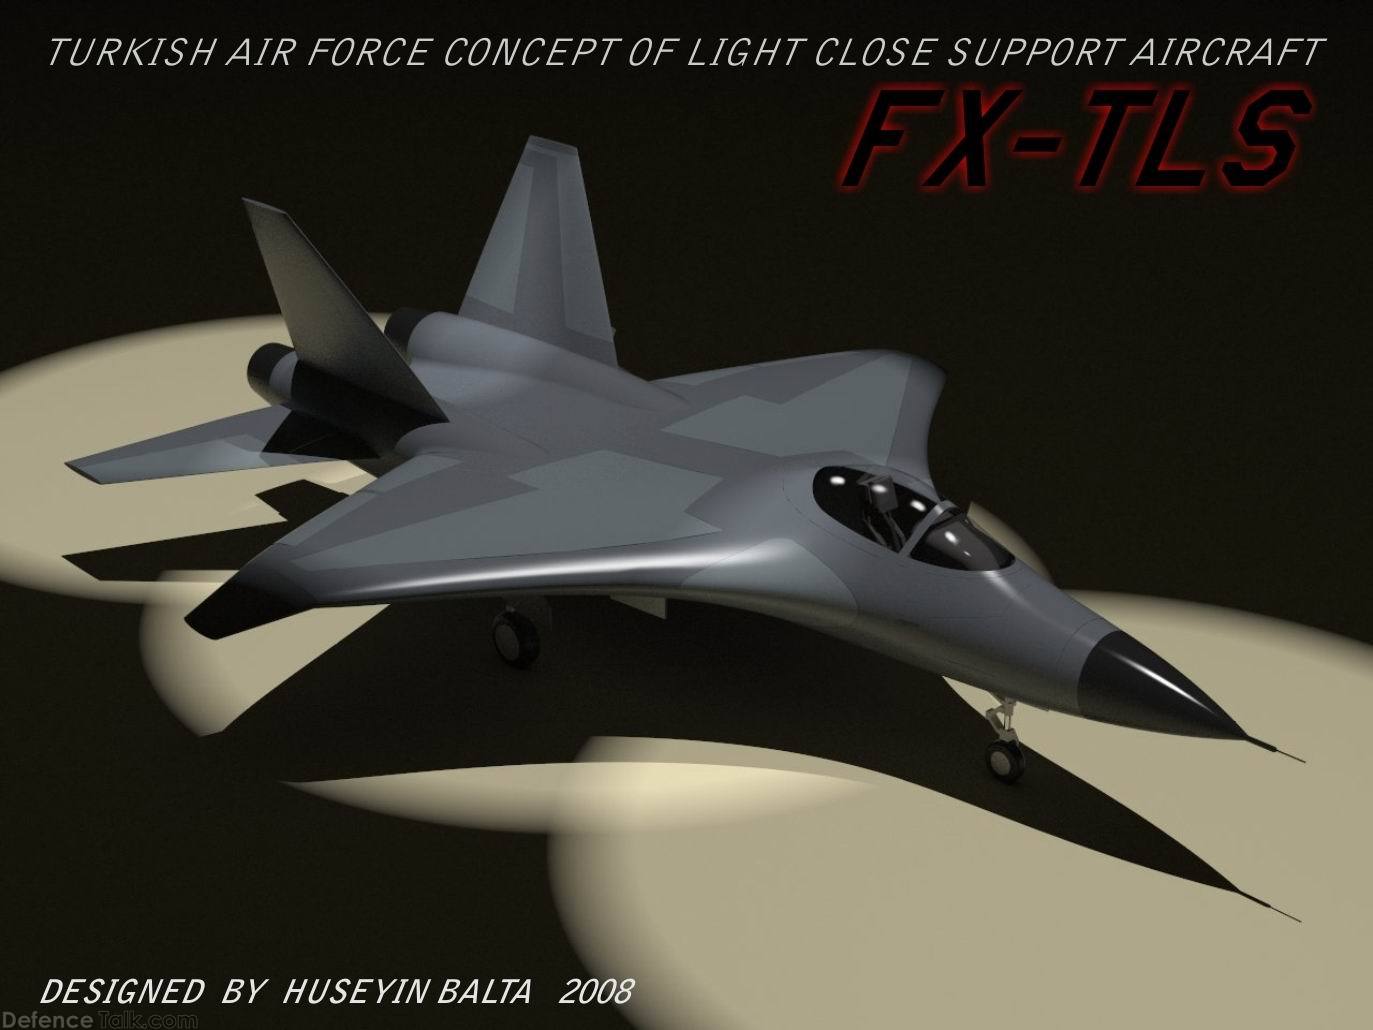 XF- TLS Turkish Close Support Aircraft Concept